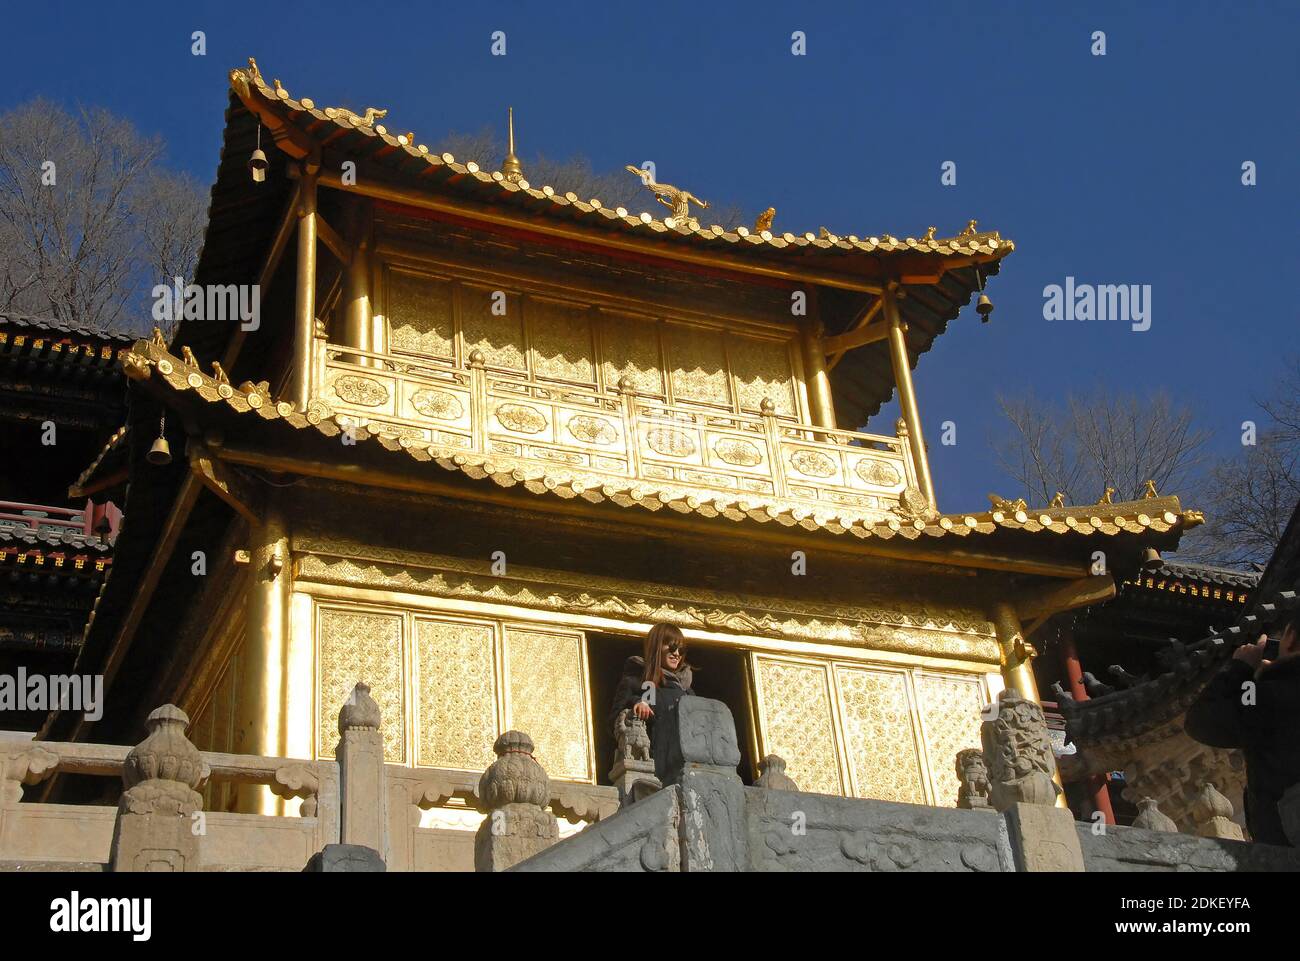 Wutaishan, Shanxi Province in China. This is the Copper Hall (or Bronze Hall) at Xiantong Temple in Wutai Mountain with a visitor. Stock Photo